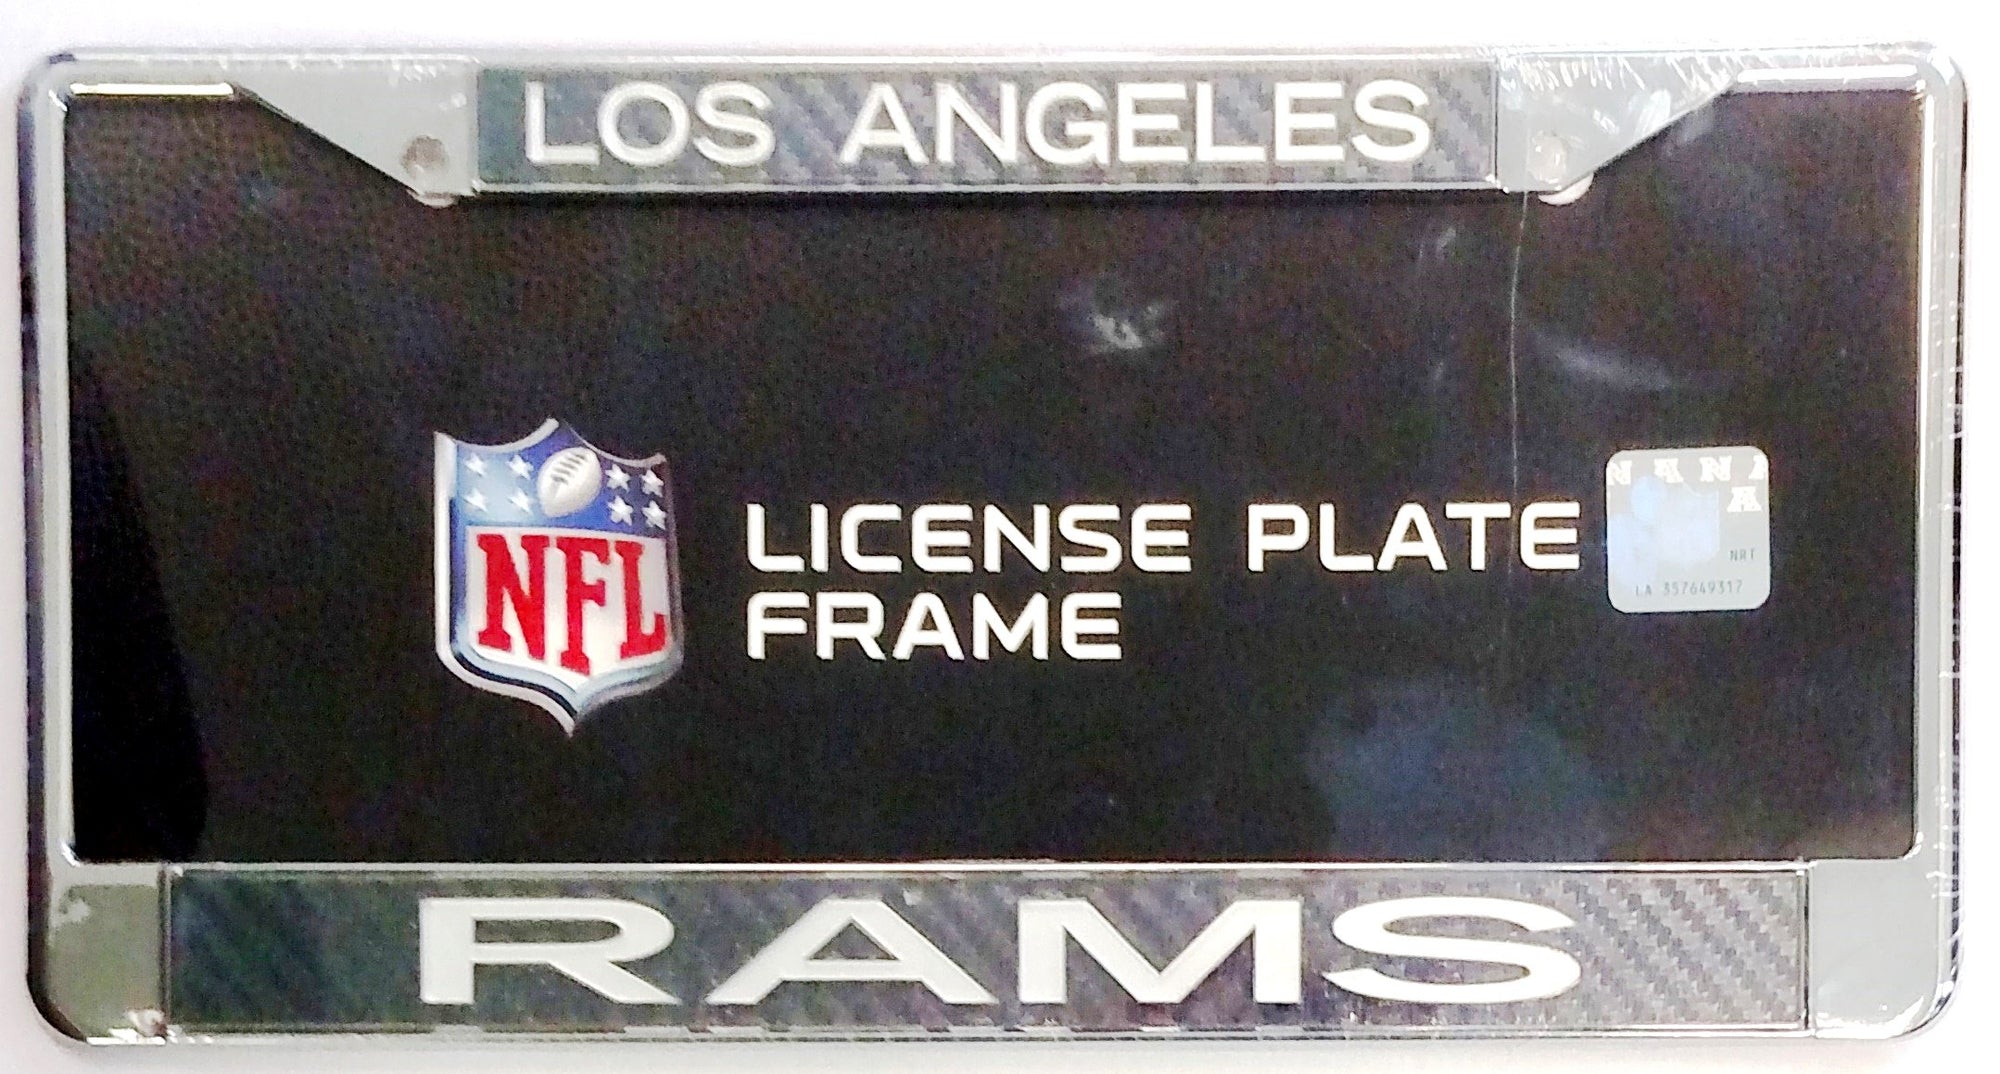 Los Angeles Rams Chrome Metal License Plate Frame Tag Cover, Laser Acrylic Mirrored Inserts, Carbon Fiber Design,12x6 Inch